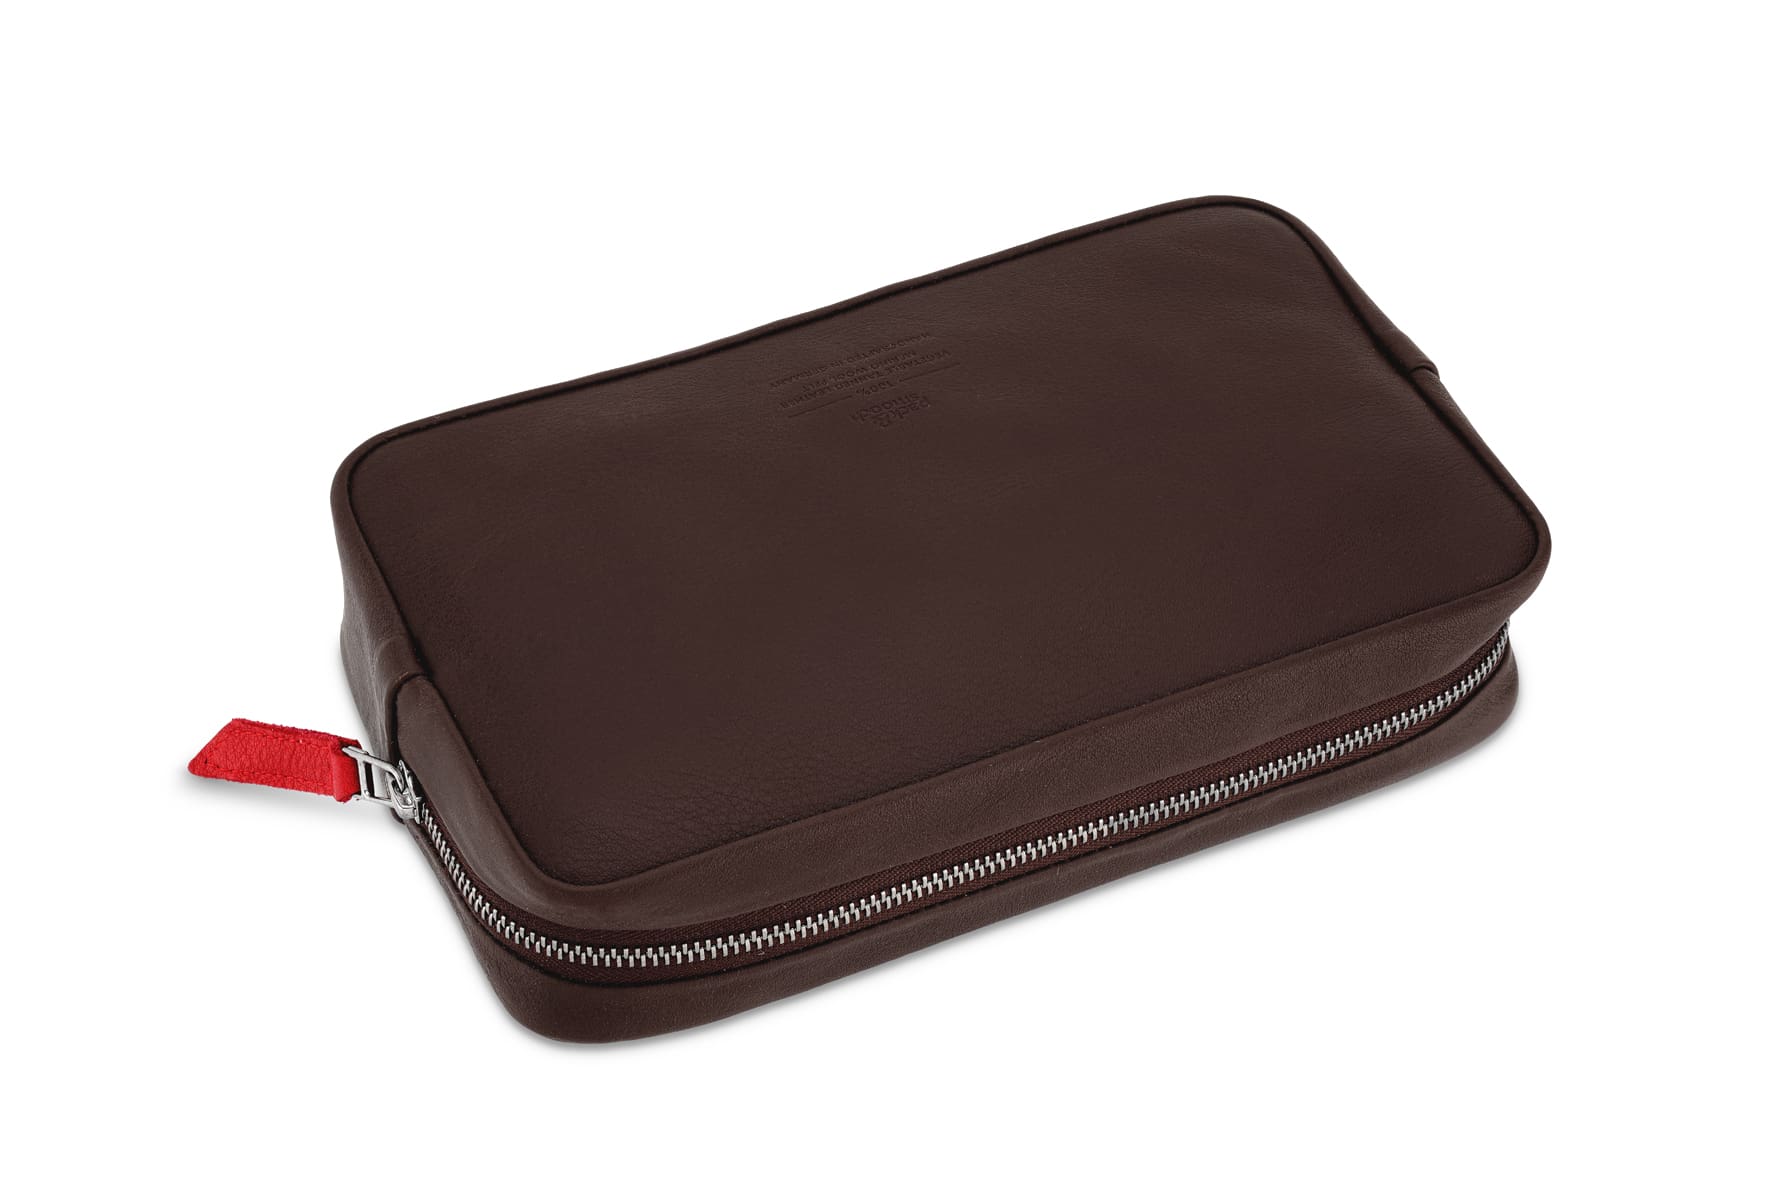 Cable bag, accessory bag for Apple iPad and MacBook